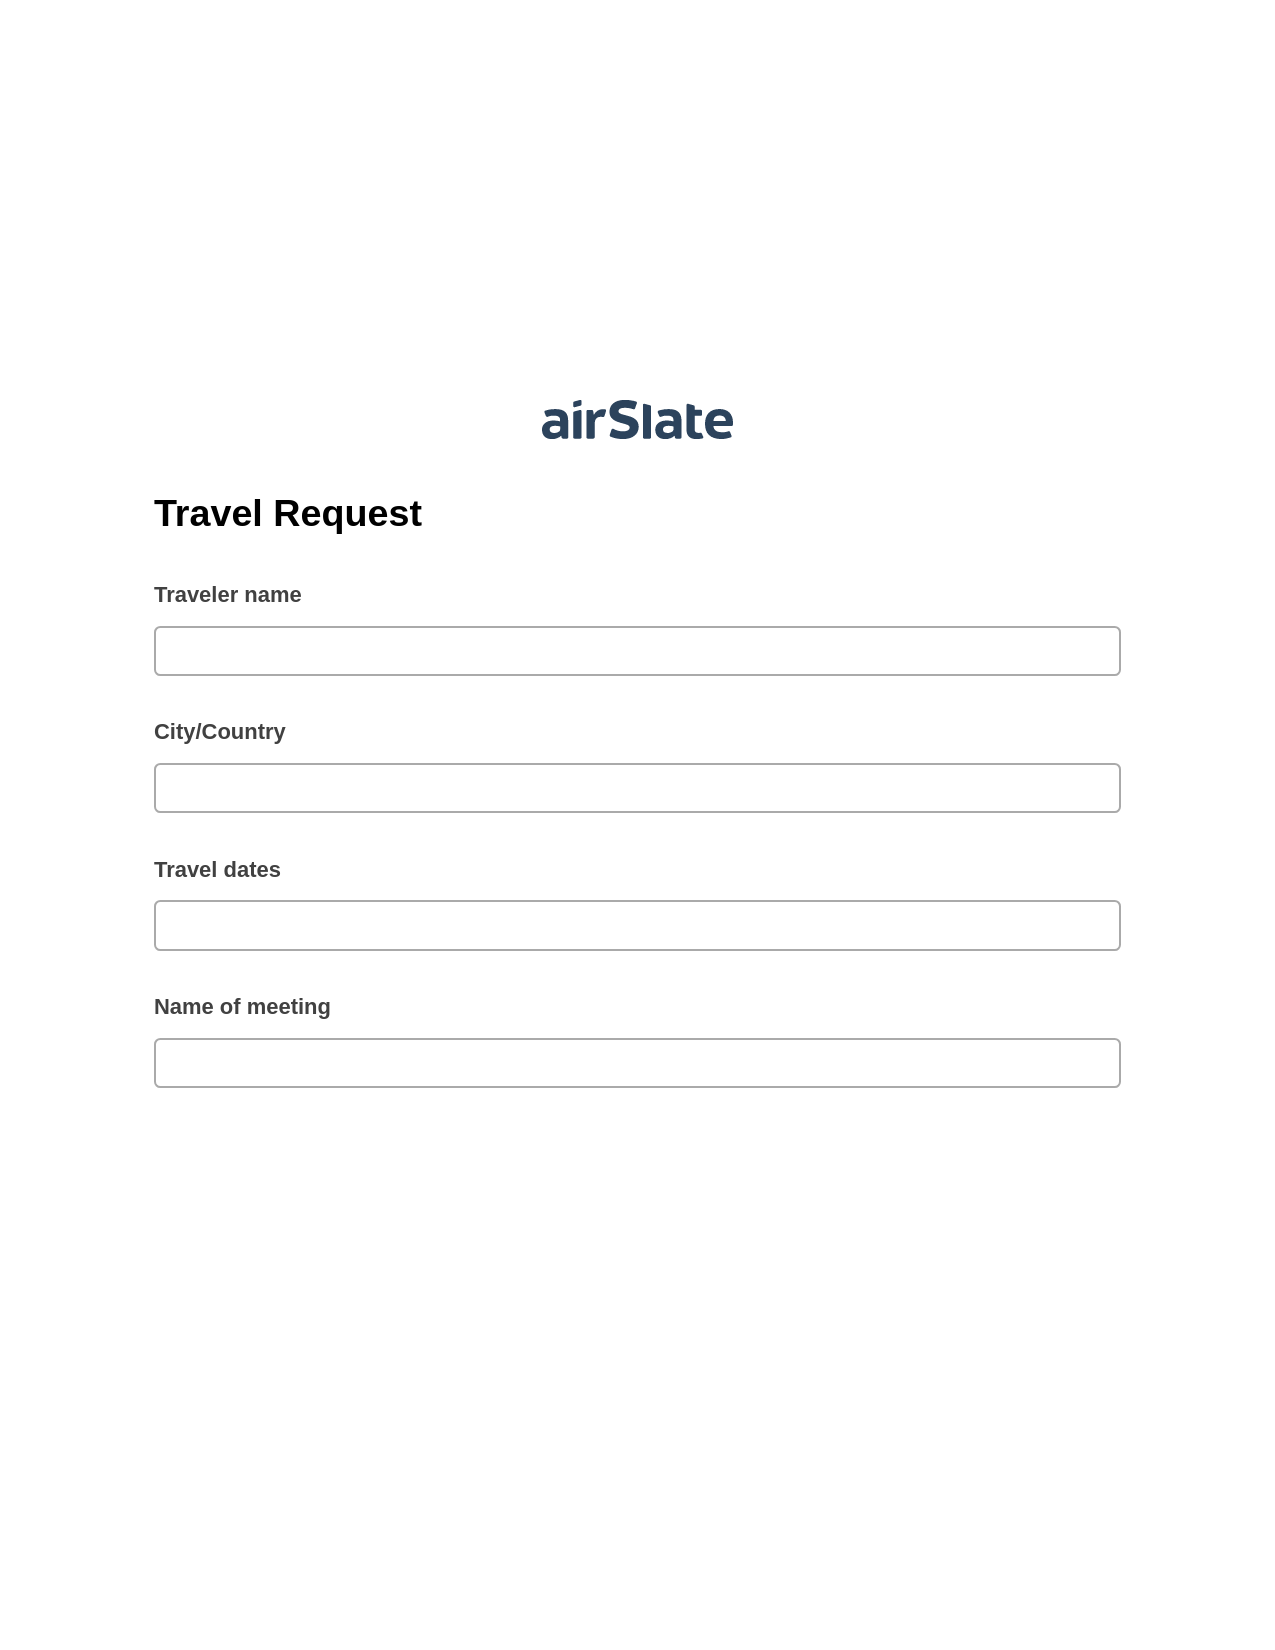 Travel Request Pre-fill Document Bot, Email Notification Bot, Export to MySQL Bot